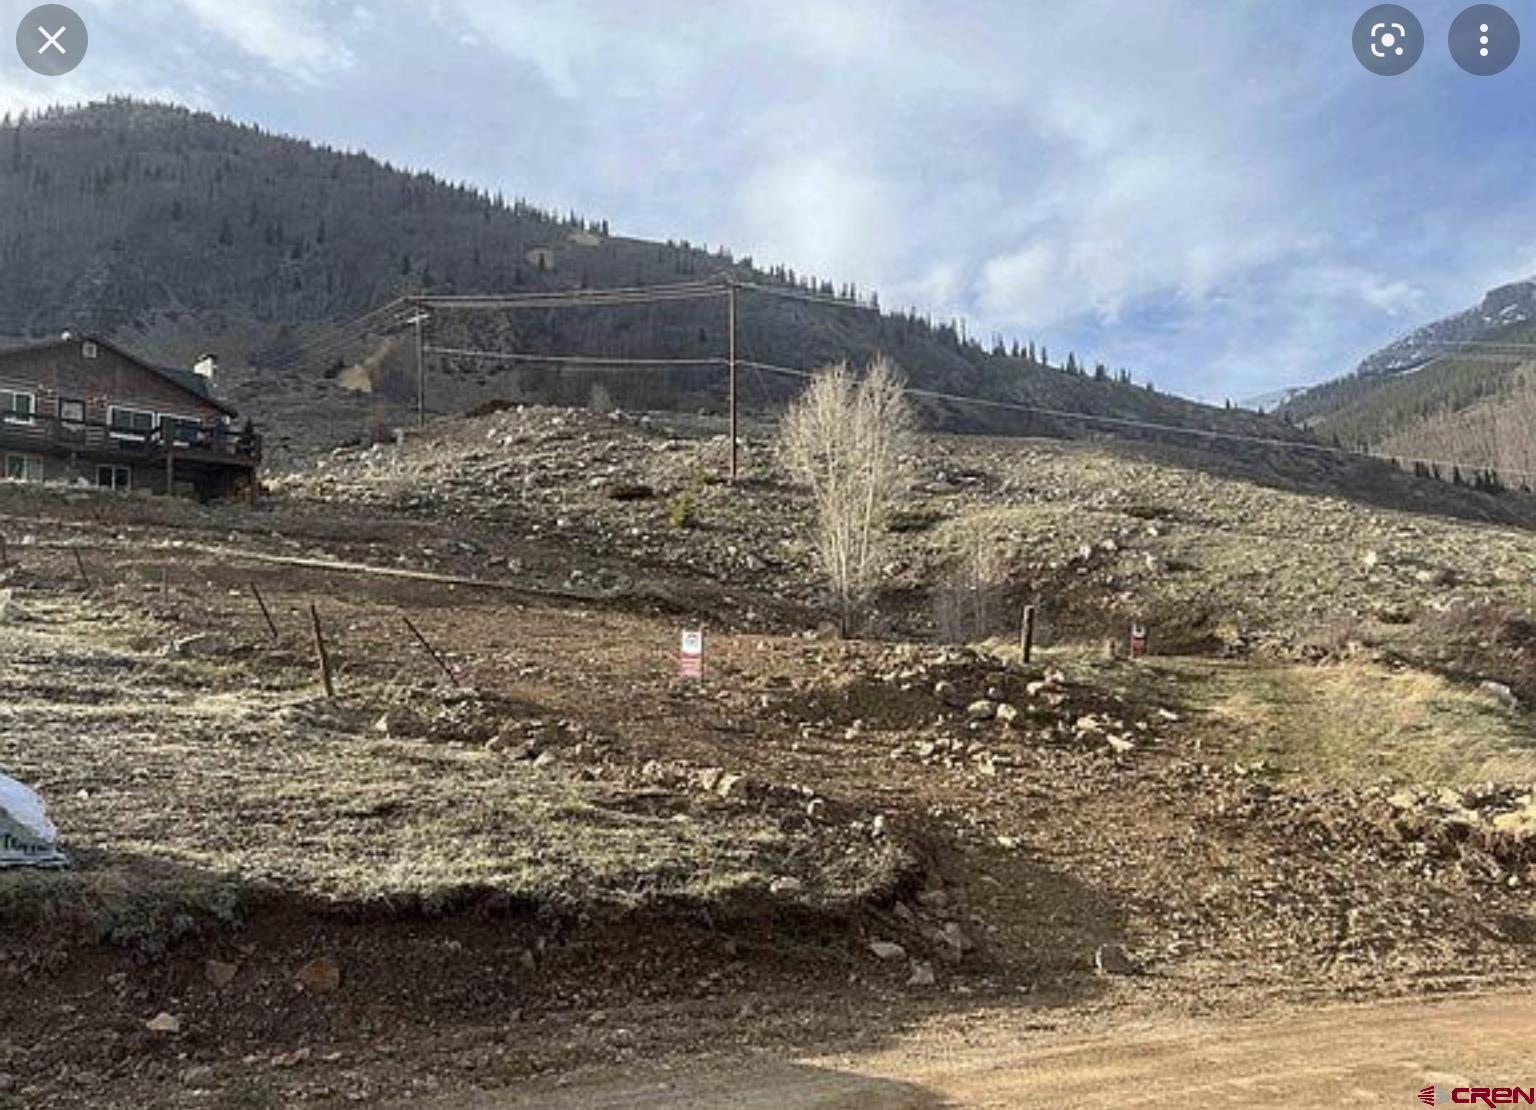 Photo of Tbd Bluff St (Between 10th & 11th Streets) in Silverton, CO